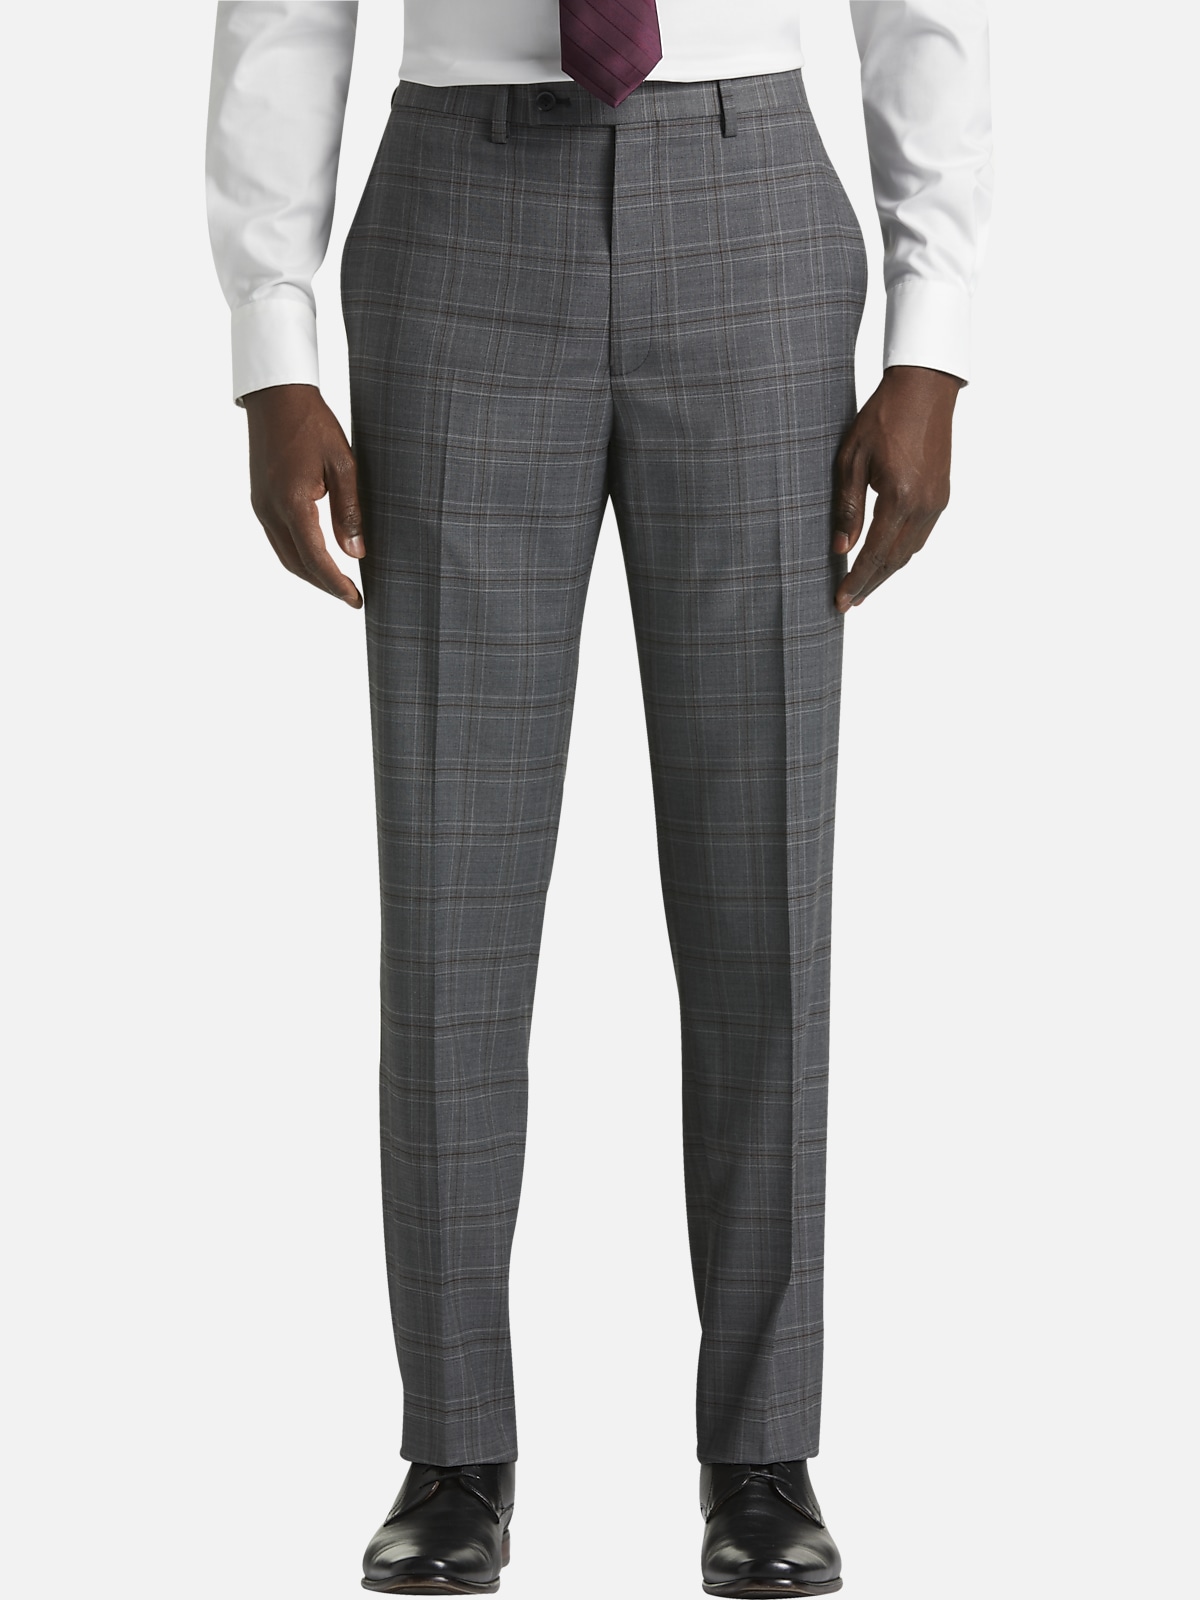 Michael Strahan Classic Fit Suit Separates Pants Plaid All Clearance 3999 Mens Wearhouse 